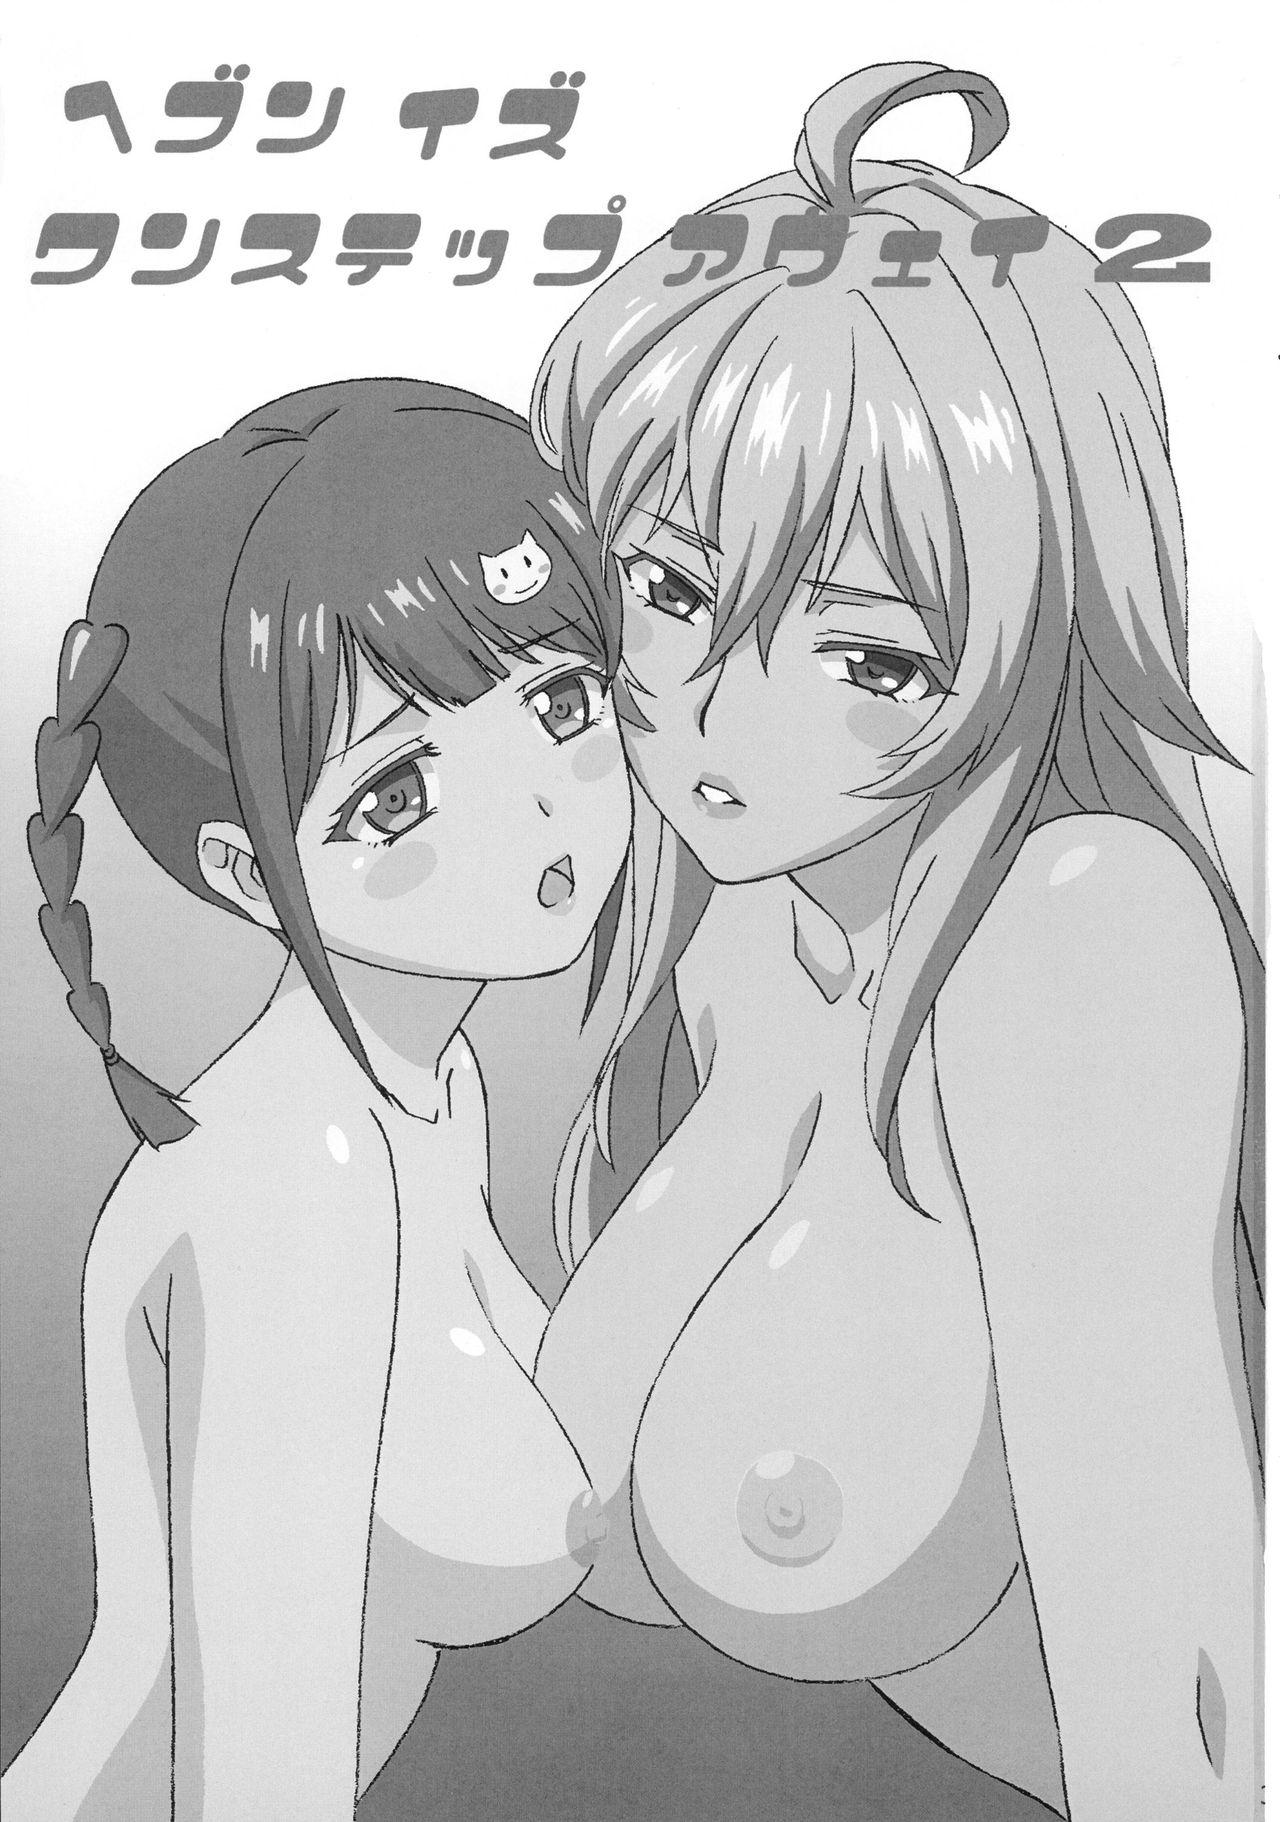 Tinder Heaven is one step away 2 - Valkyrie drive Family Taboo - Page 3